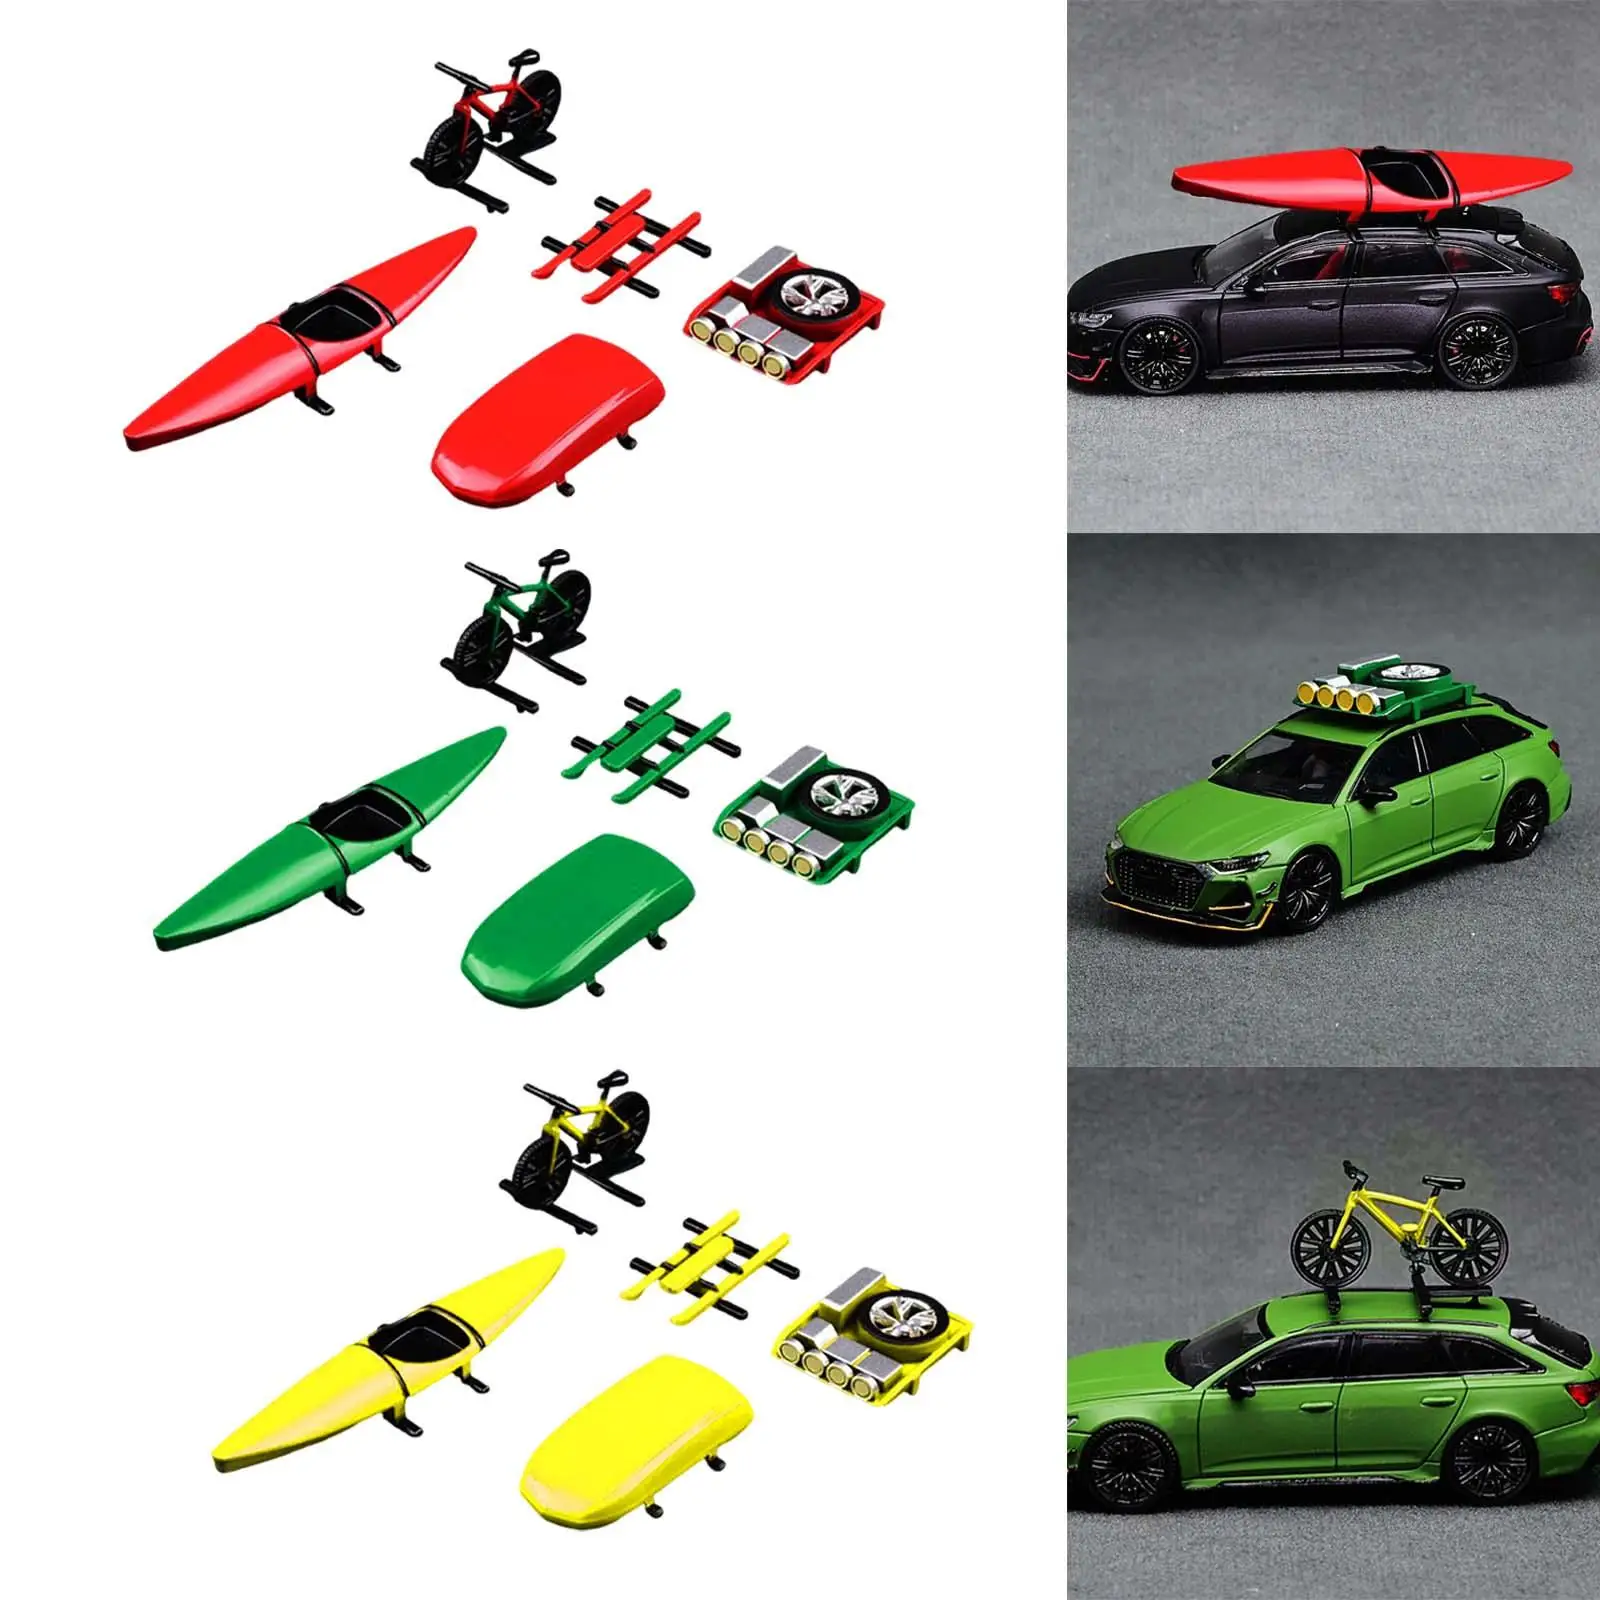 5 Pieces Upgrade Parts Model Car Parts High Performance Tire Kayak Roof box for 1/64 RC Car DIY Accs Vehicle Accessory Part images - 6